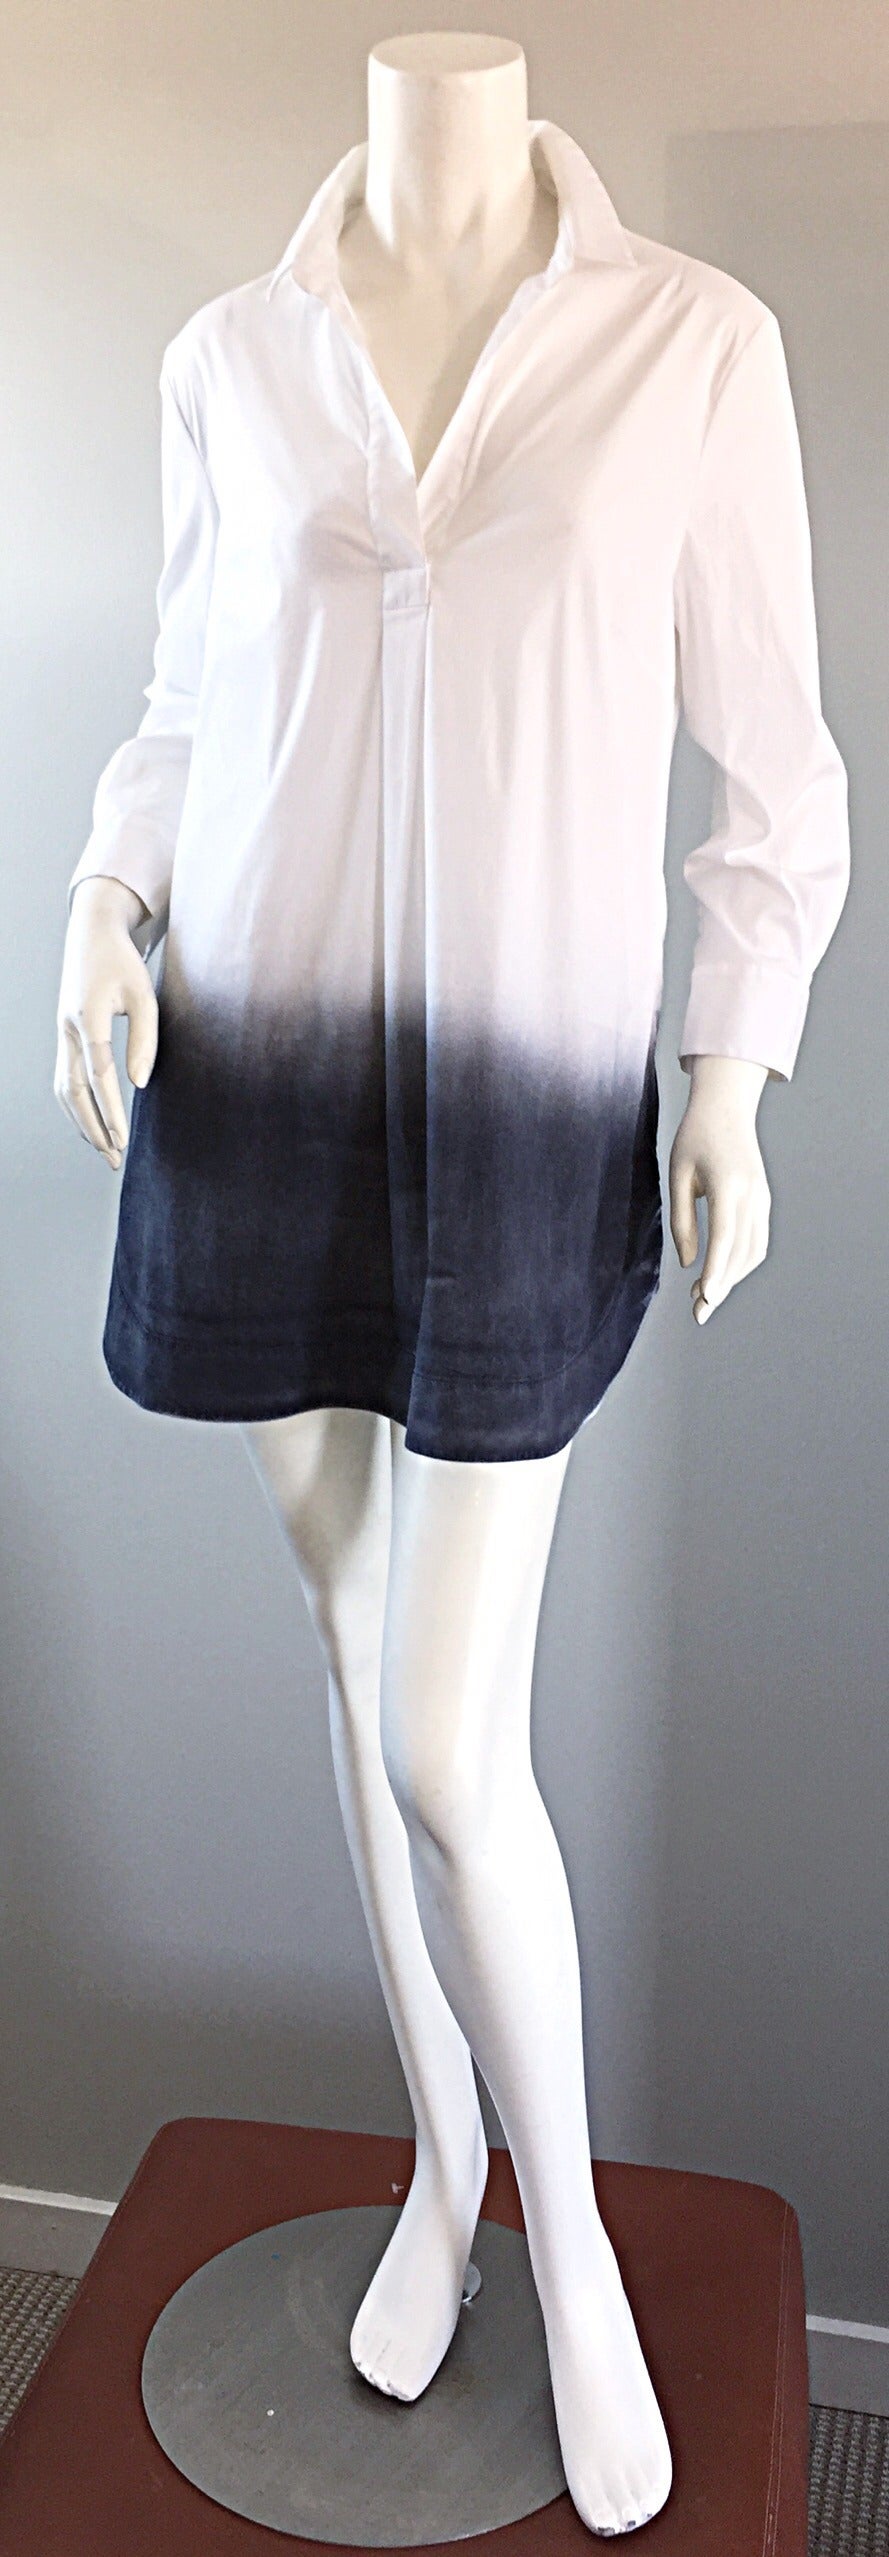 Brand new Piazza Sempione white and gray dip-dyed cotton stretch tunic! Retailed for $895, and never worn! Side vents, with an oversized, yet slimming and tailored fit. Looks great with leggings, jeans, over a swimsuit, etc. In brand new condition.